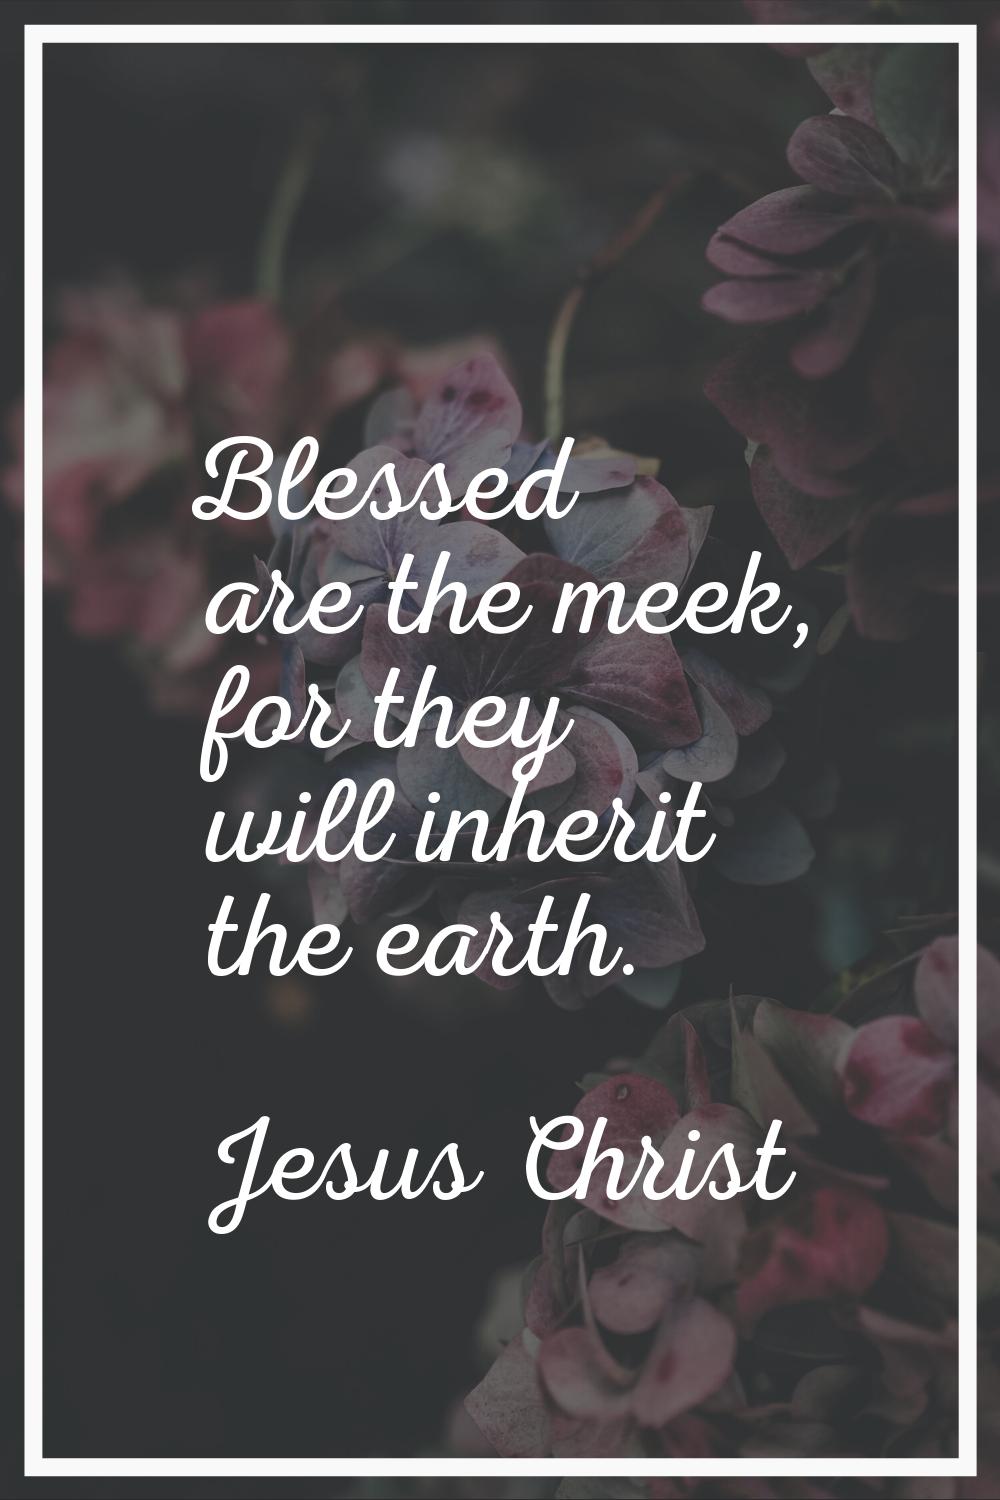 Blessed are the meek, for they will inherit the earth.